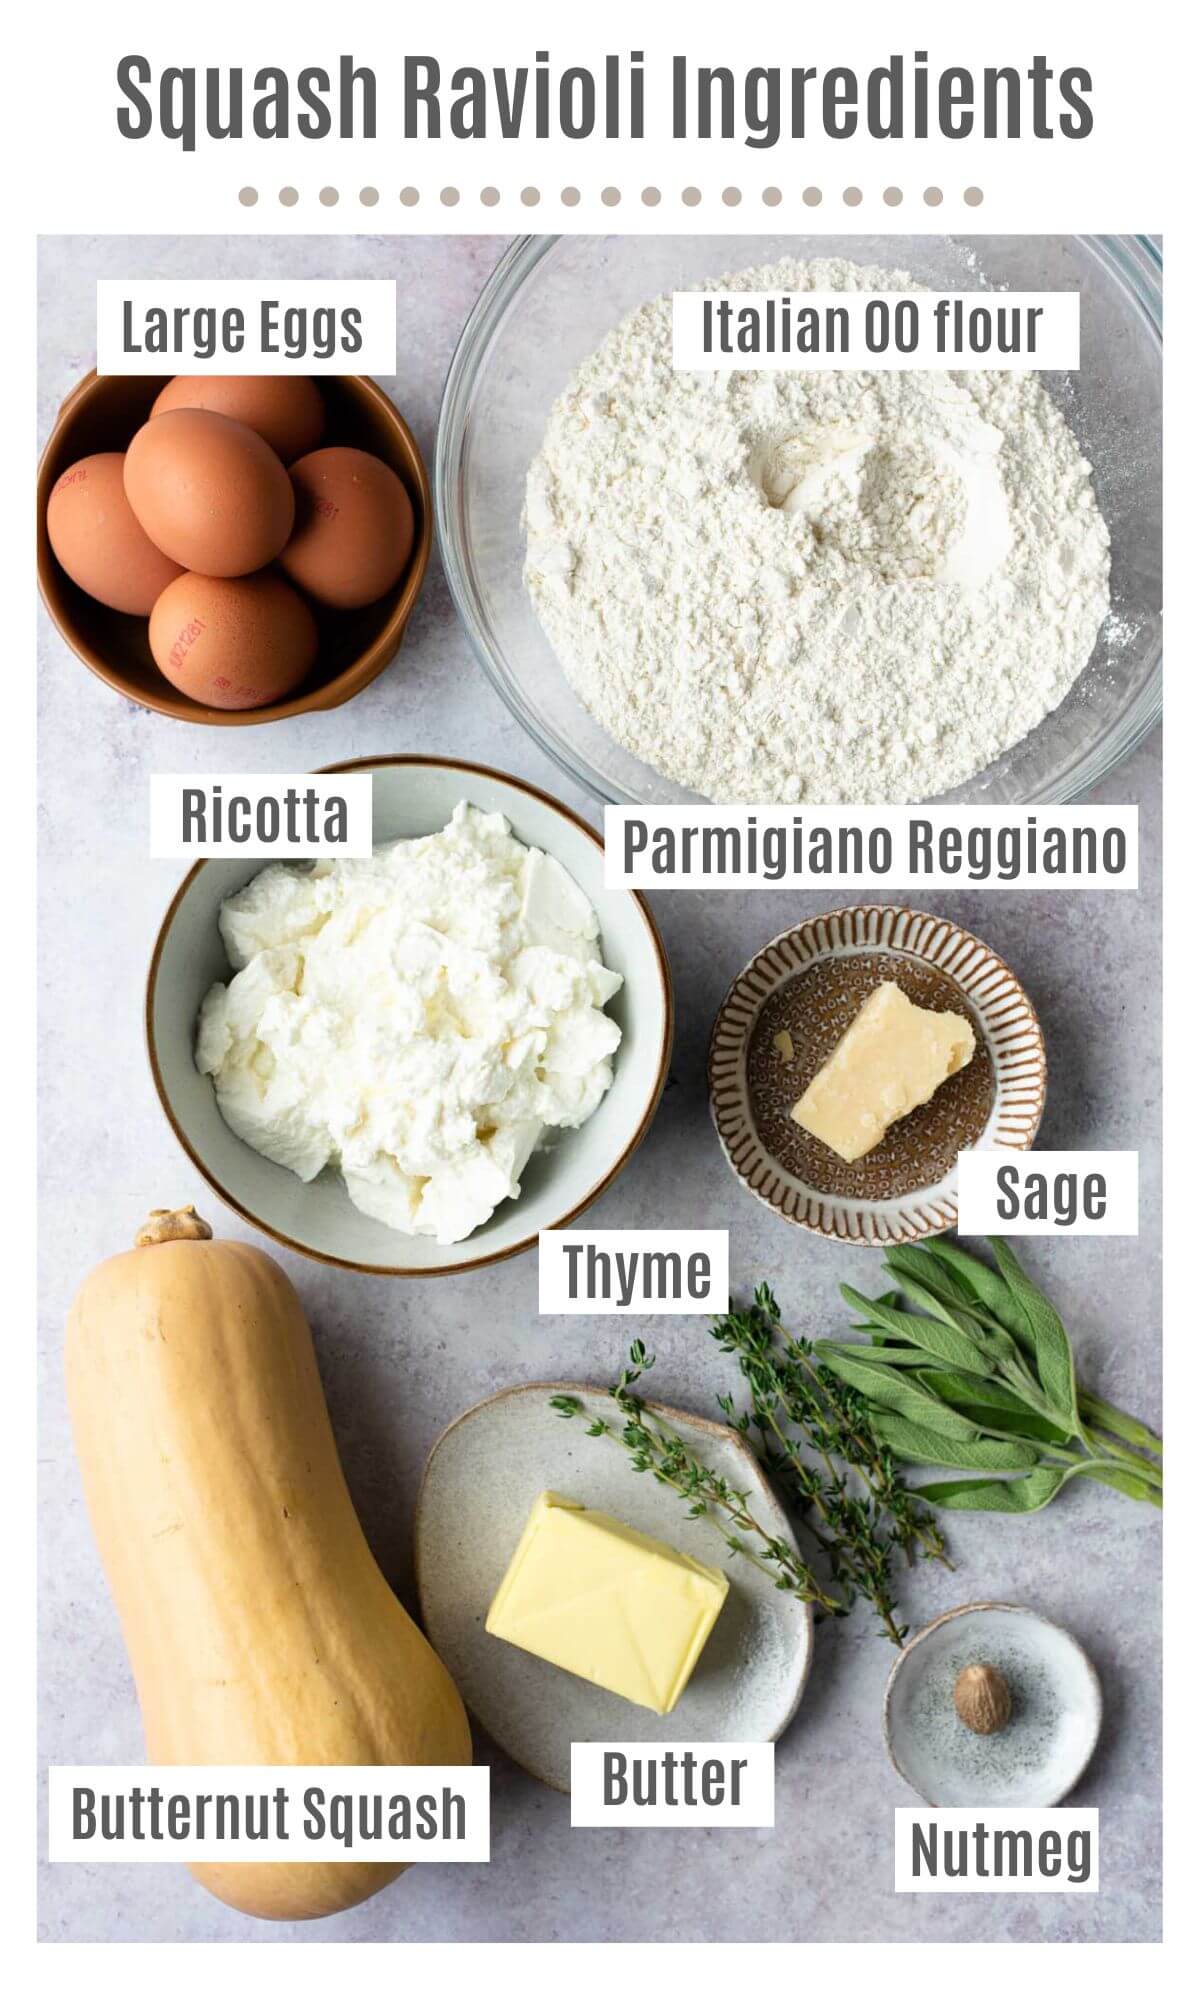 An overhead image showing all the ingredients needed to make butternut squash ravioli labelled; large eggs, Italian 00 flour,, ricotta, Parmigiano Reggiano, butternut squash, sage, thyme, butter, nutmeg.